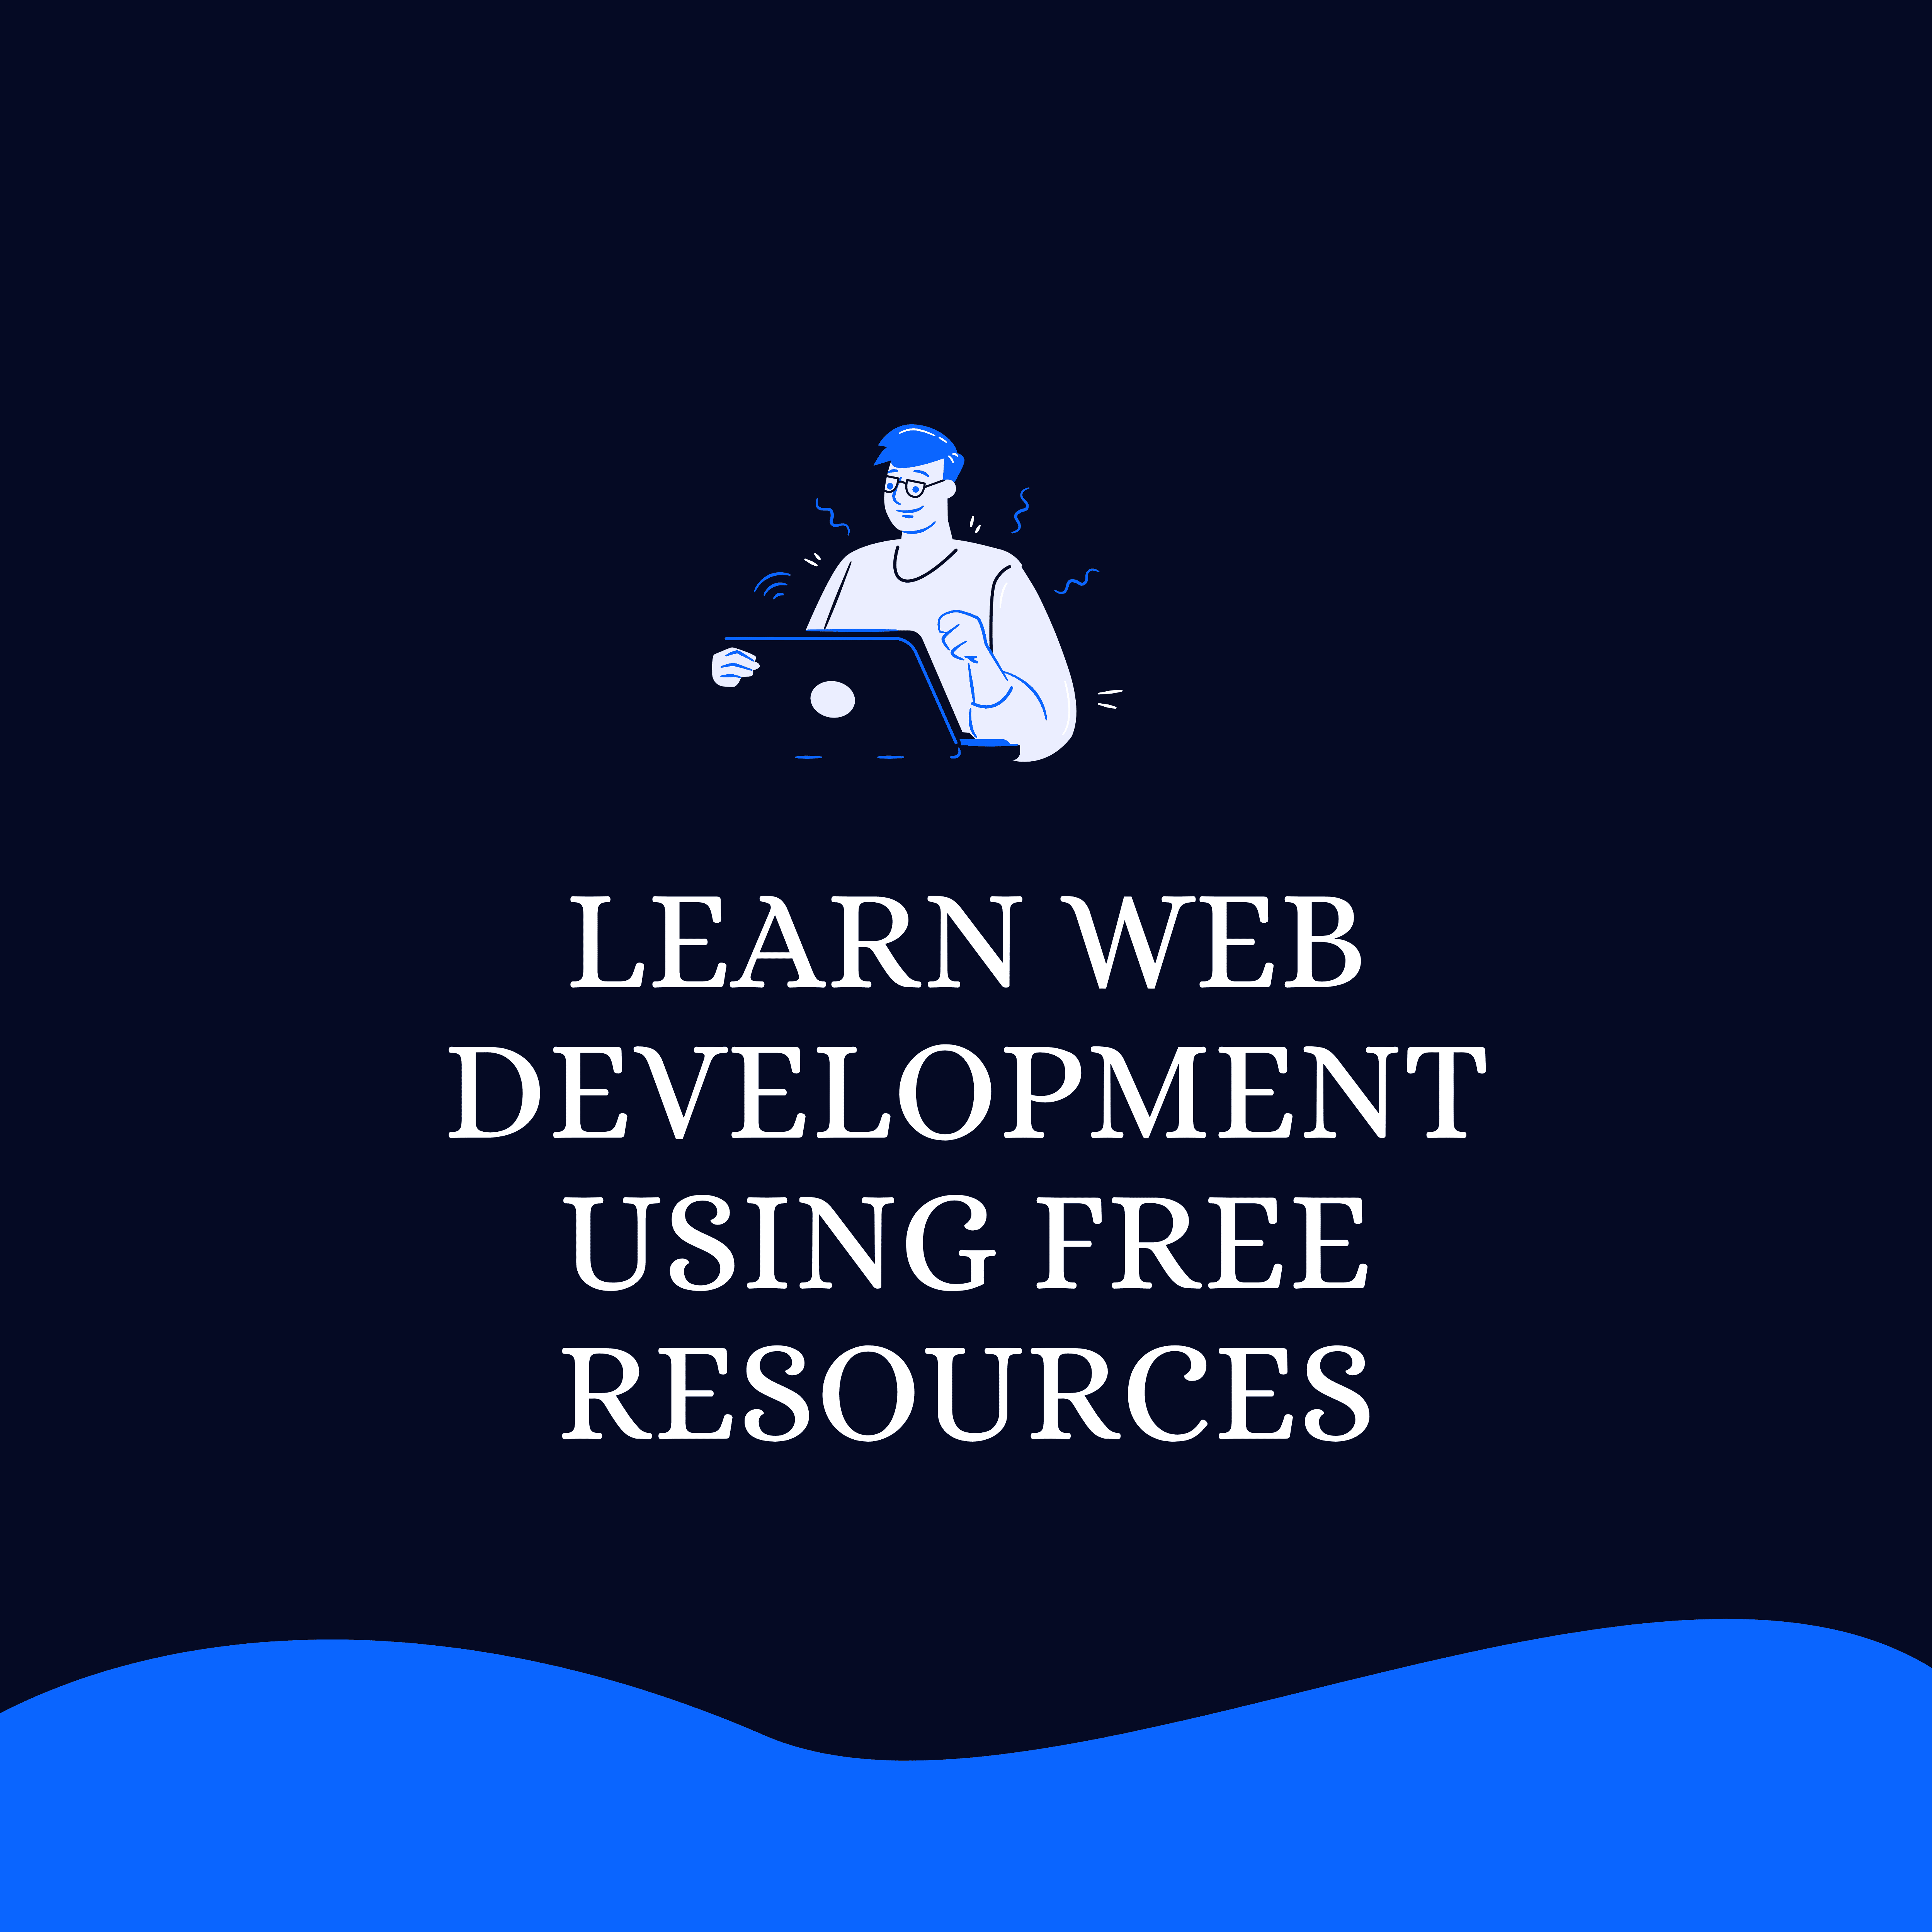 How to Learn Web Development Using Free Resources